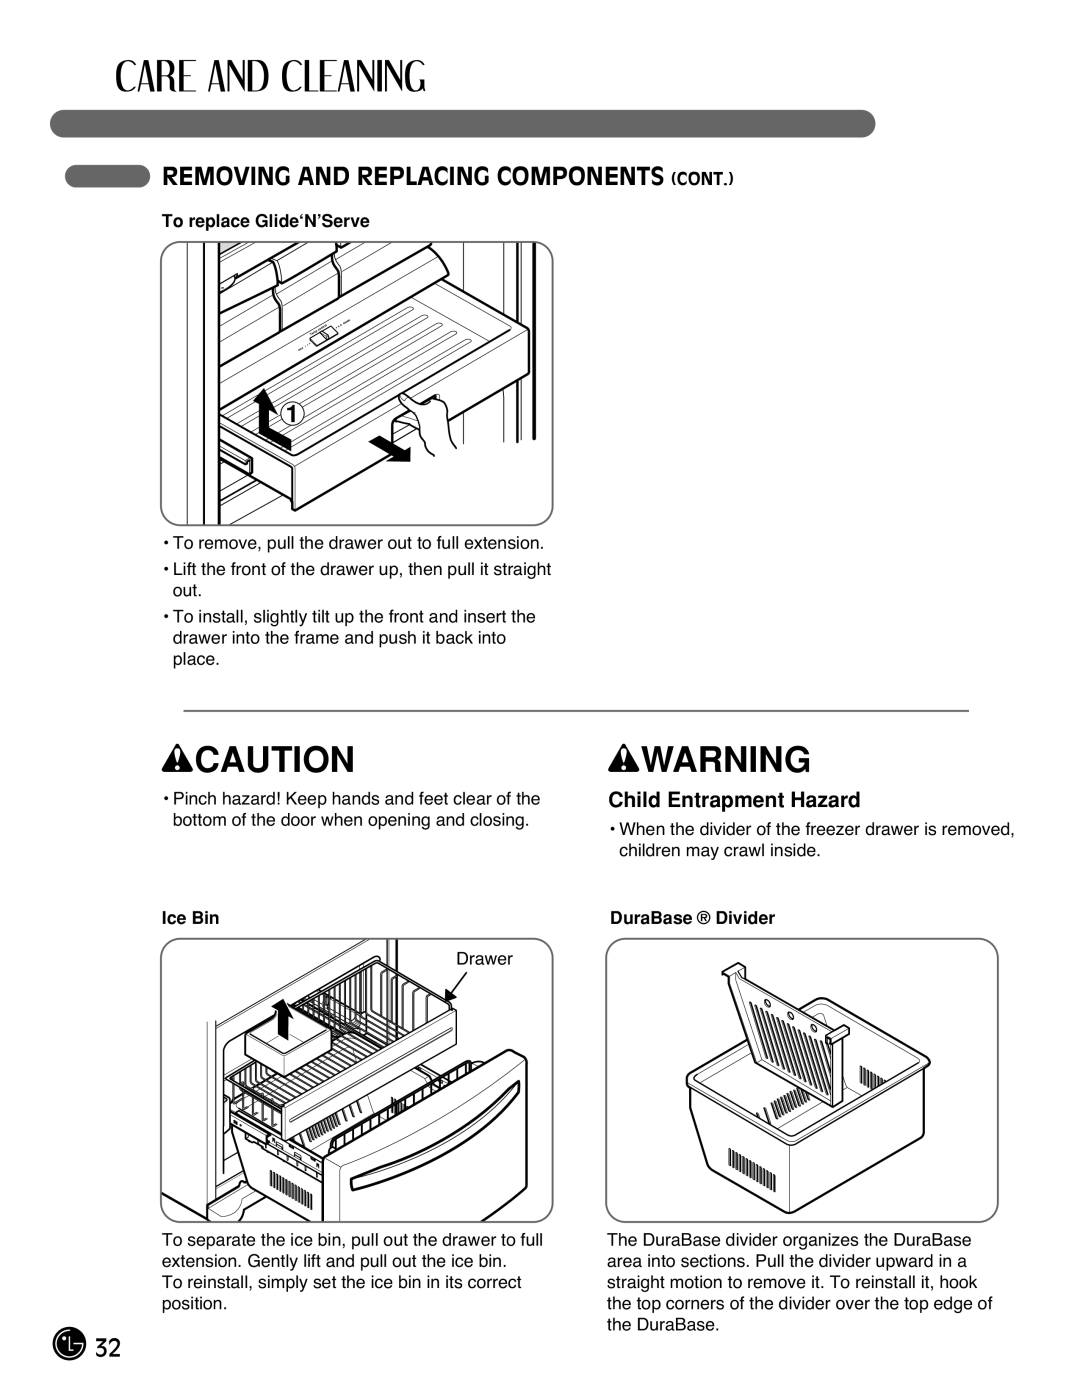 LG Electronics LFX21971** Child Entrapment Hazard, wCAUTION, wWARNING, Removing And Replacing Components Cont, Ice Bin 